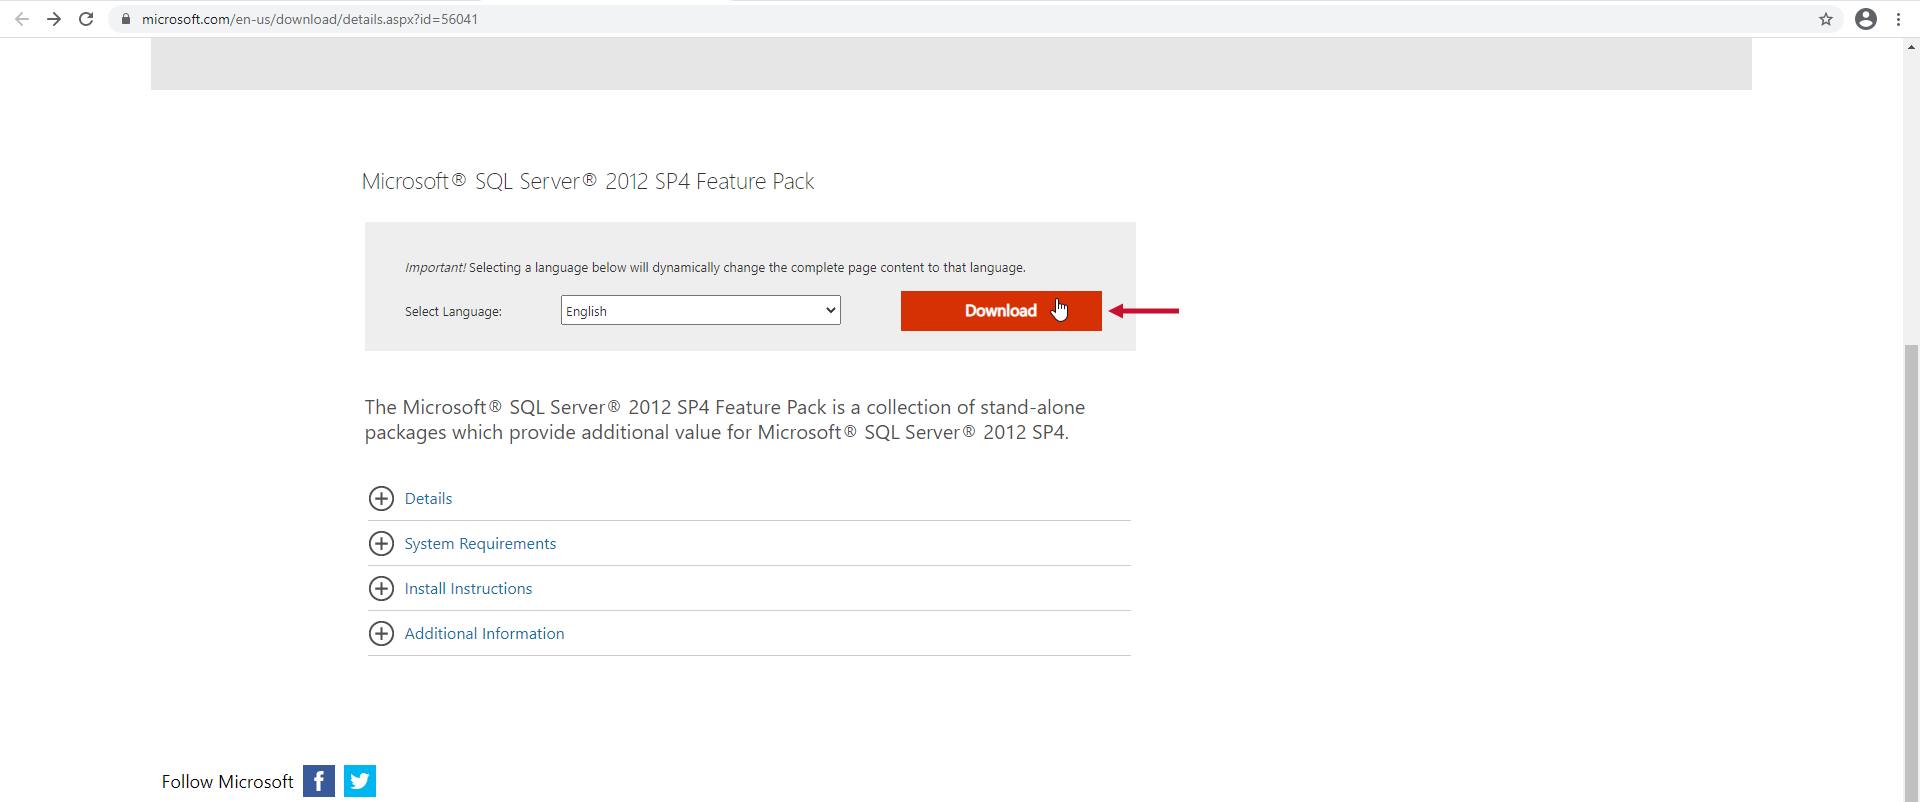 MS SQL Server 2012 SP4 Feature Pack